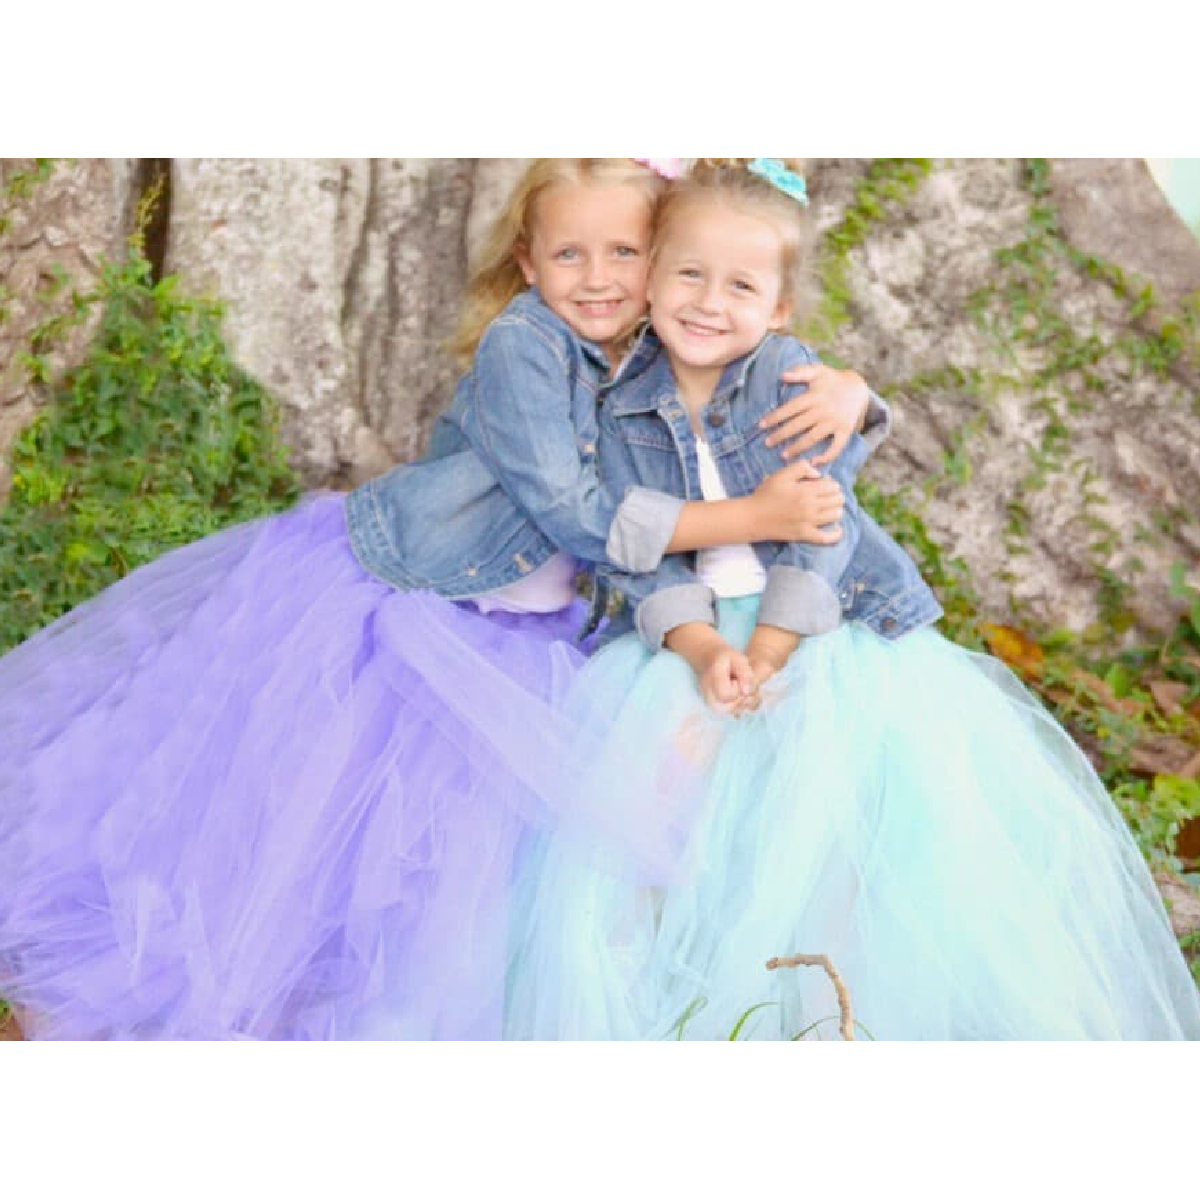 dress up ideas- blue and purple tulle skirts on 2 girls hugging by a tree- kids activities blog